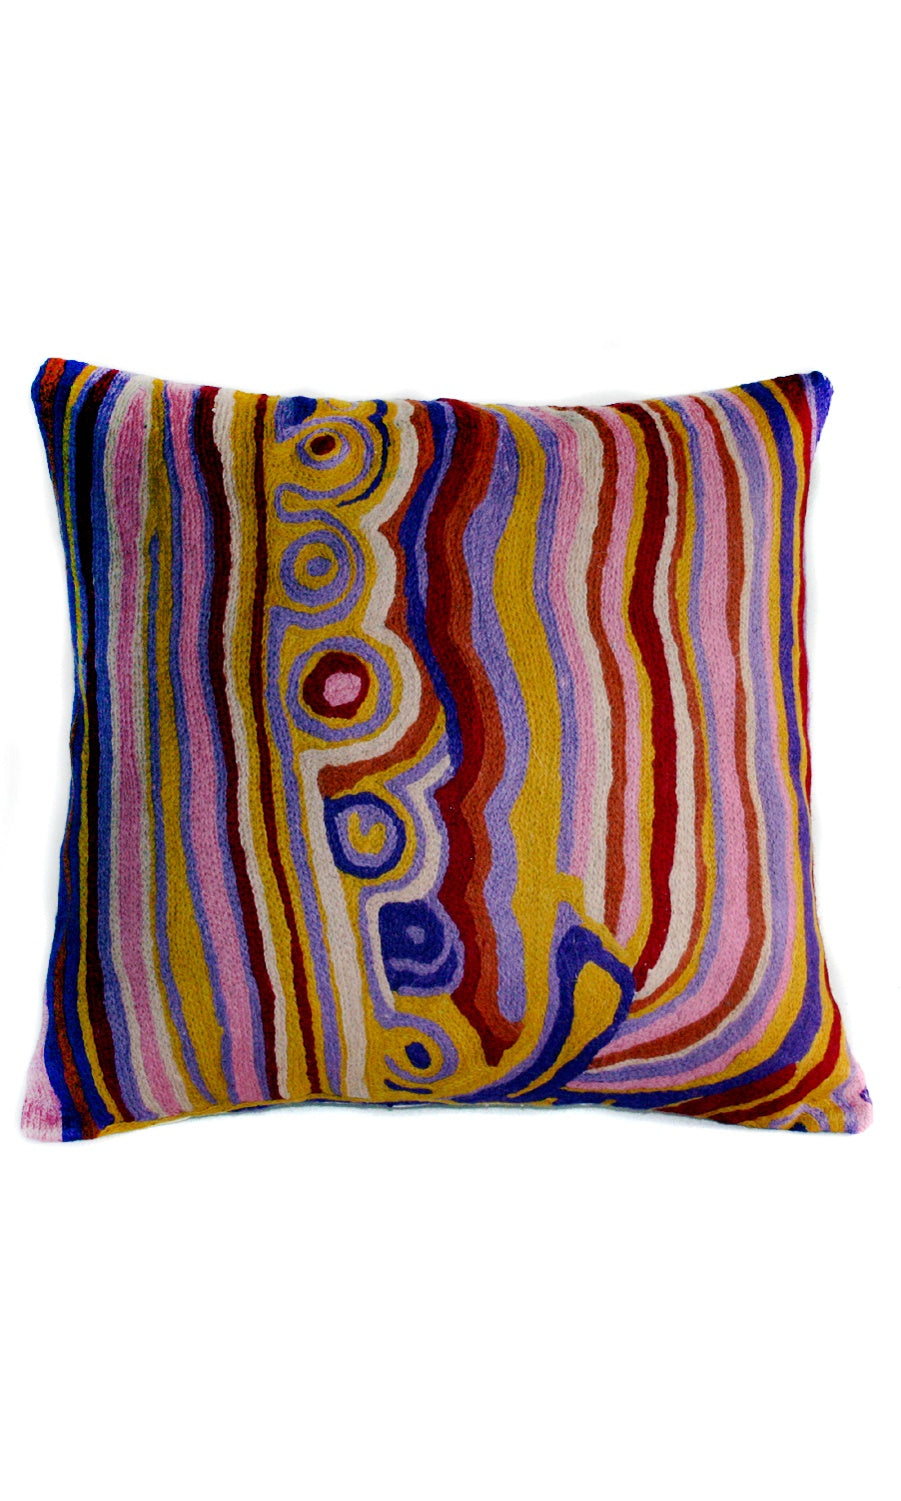 Aboriginal Art Cushion Cover by Mary Anne Nampijinpa Michaels